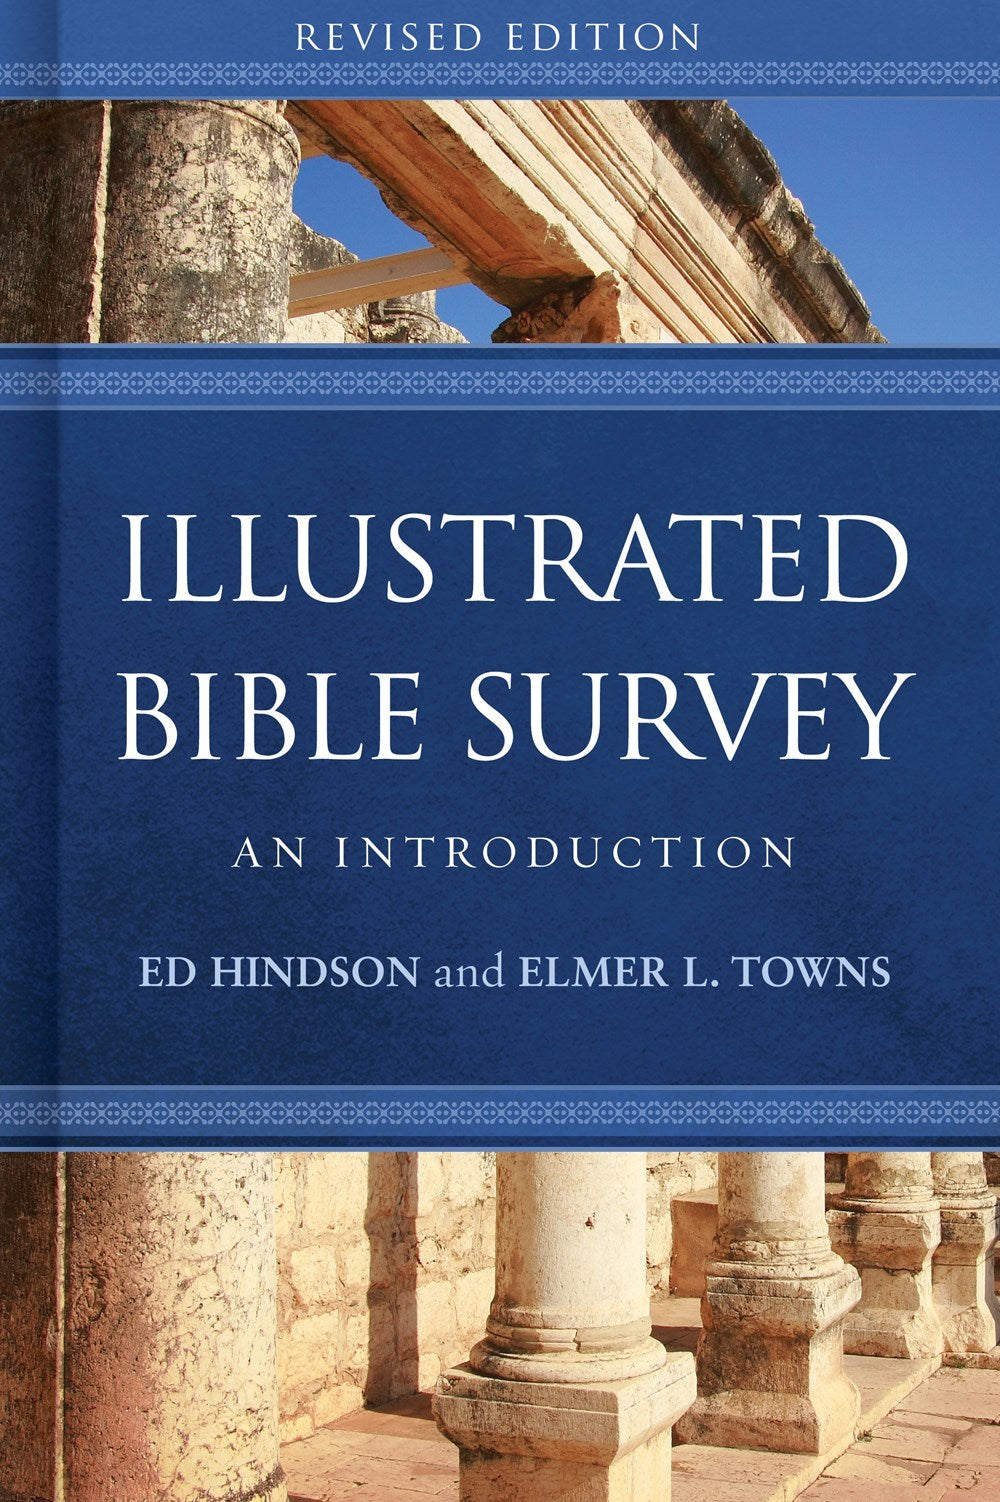 Illustrated Bible Survey (Revised)